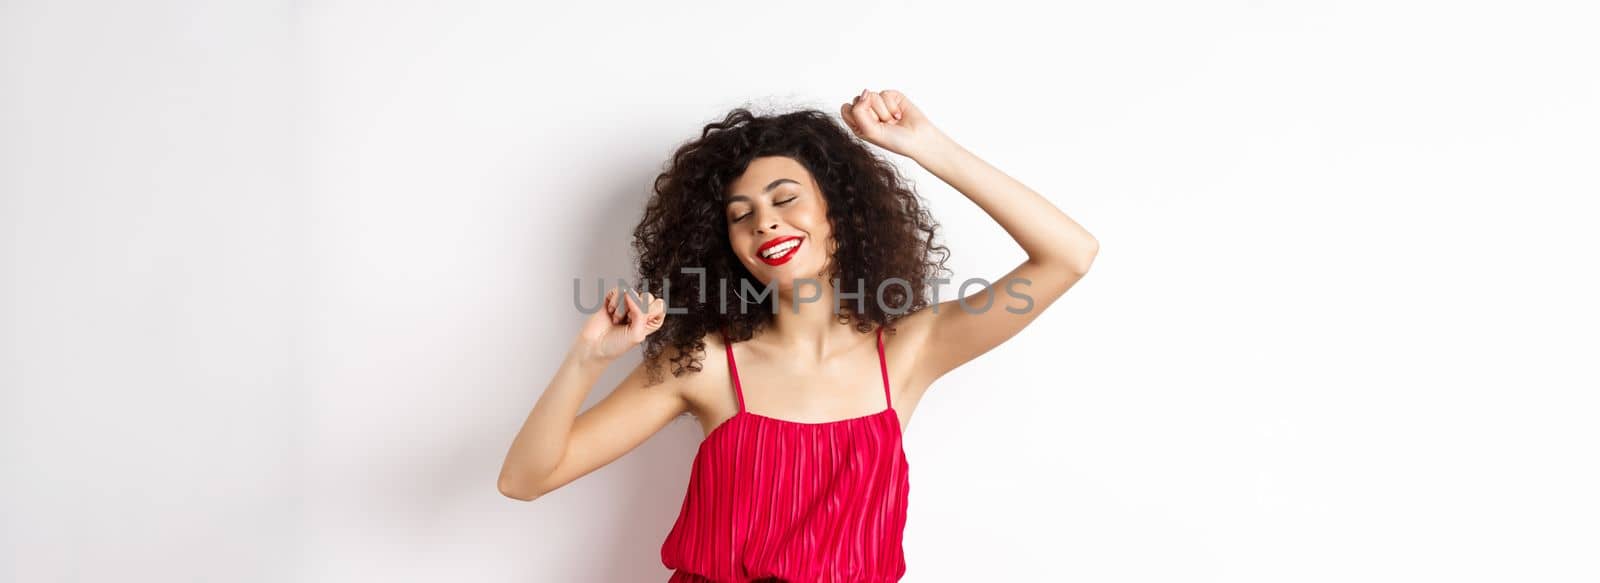 Happy elegant woman in red dress dancing on white studio background.